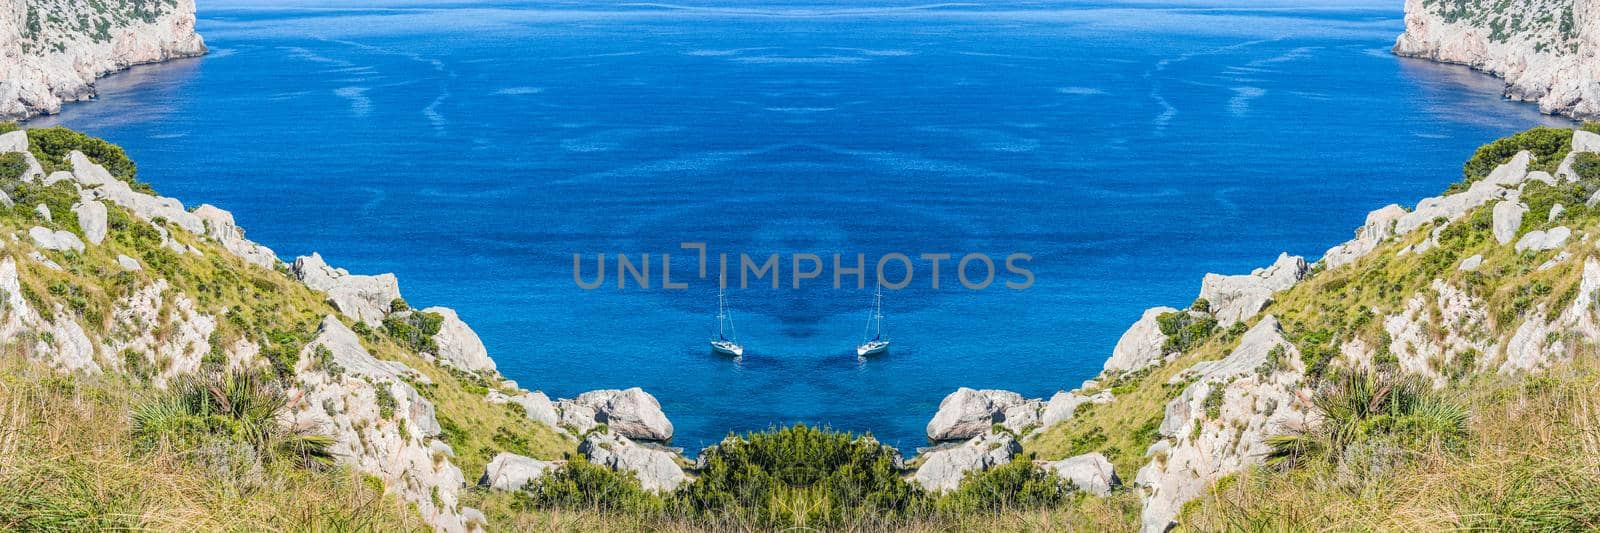 Lonely bay in picturesque seascape with 2 sailboats             by JFsPic